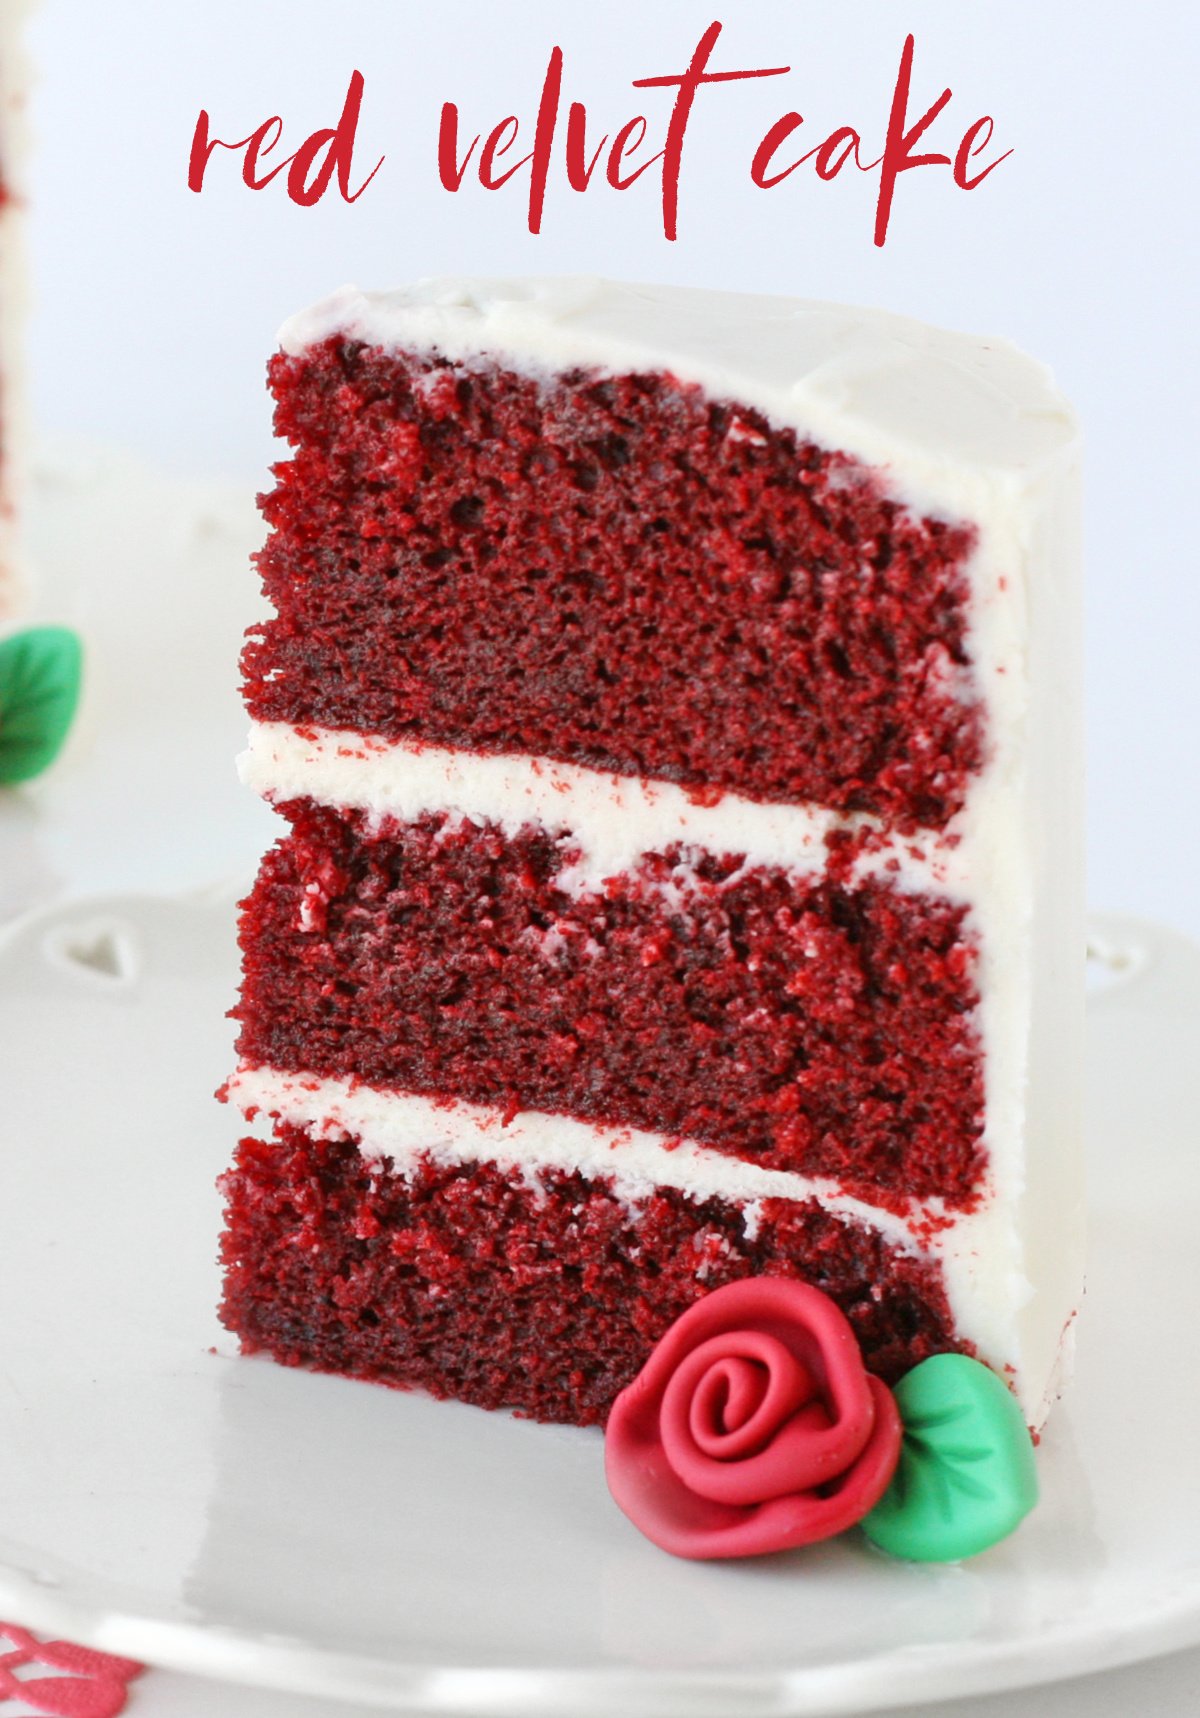 slice of red velvet cake with fondant rose on white plate with text overlay